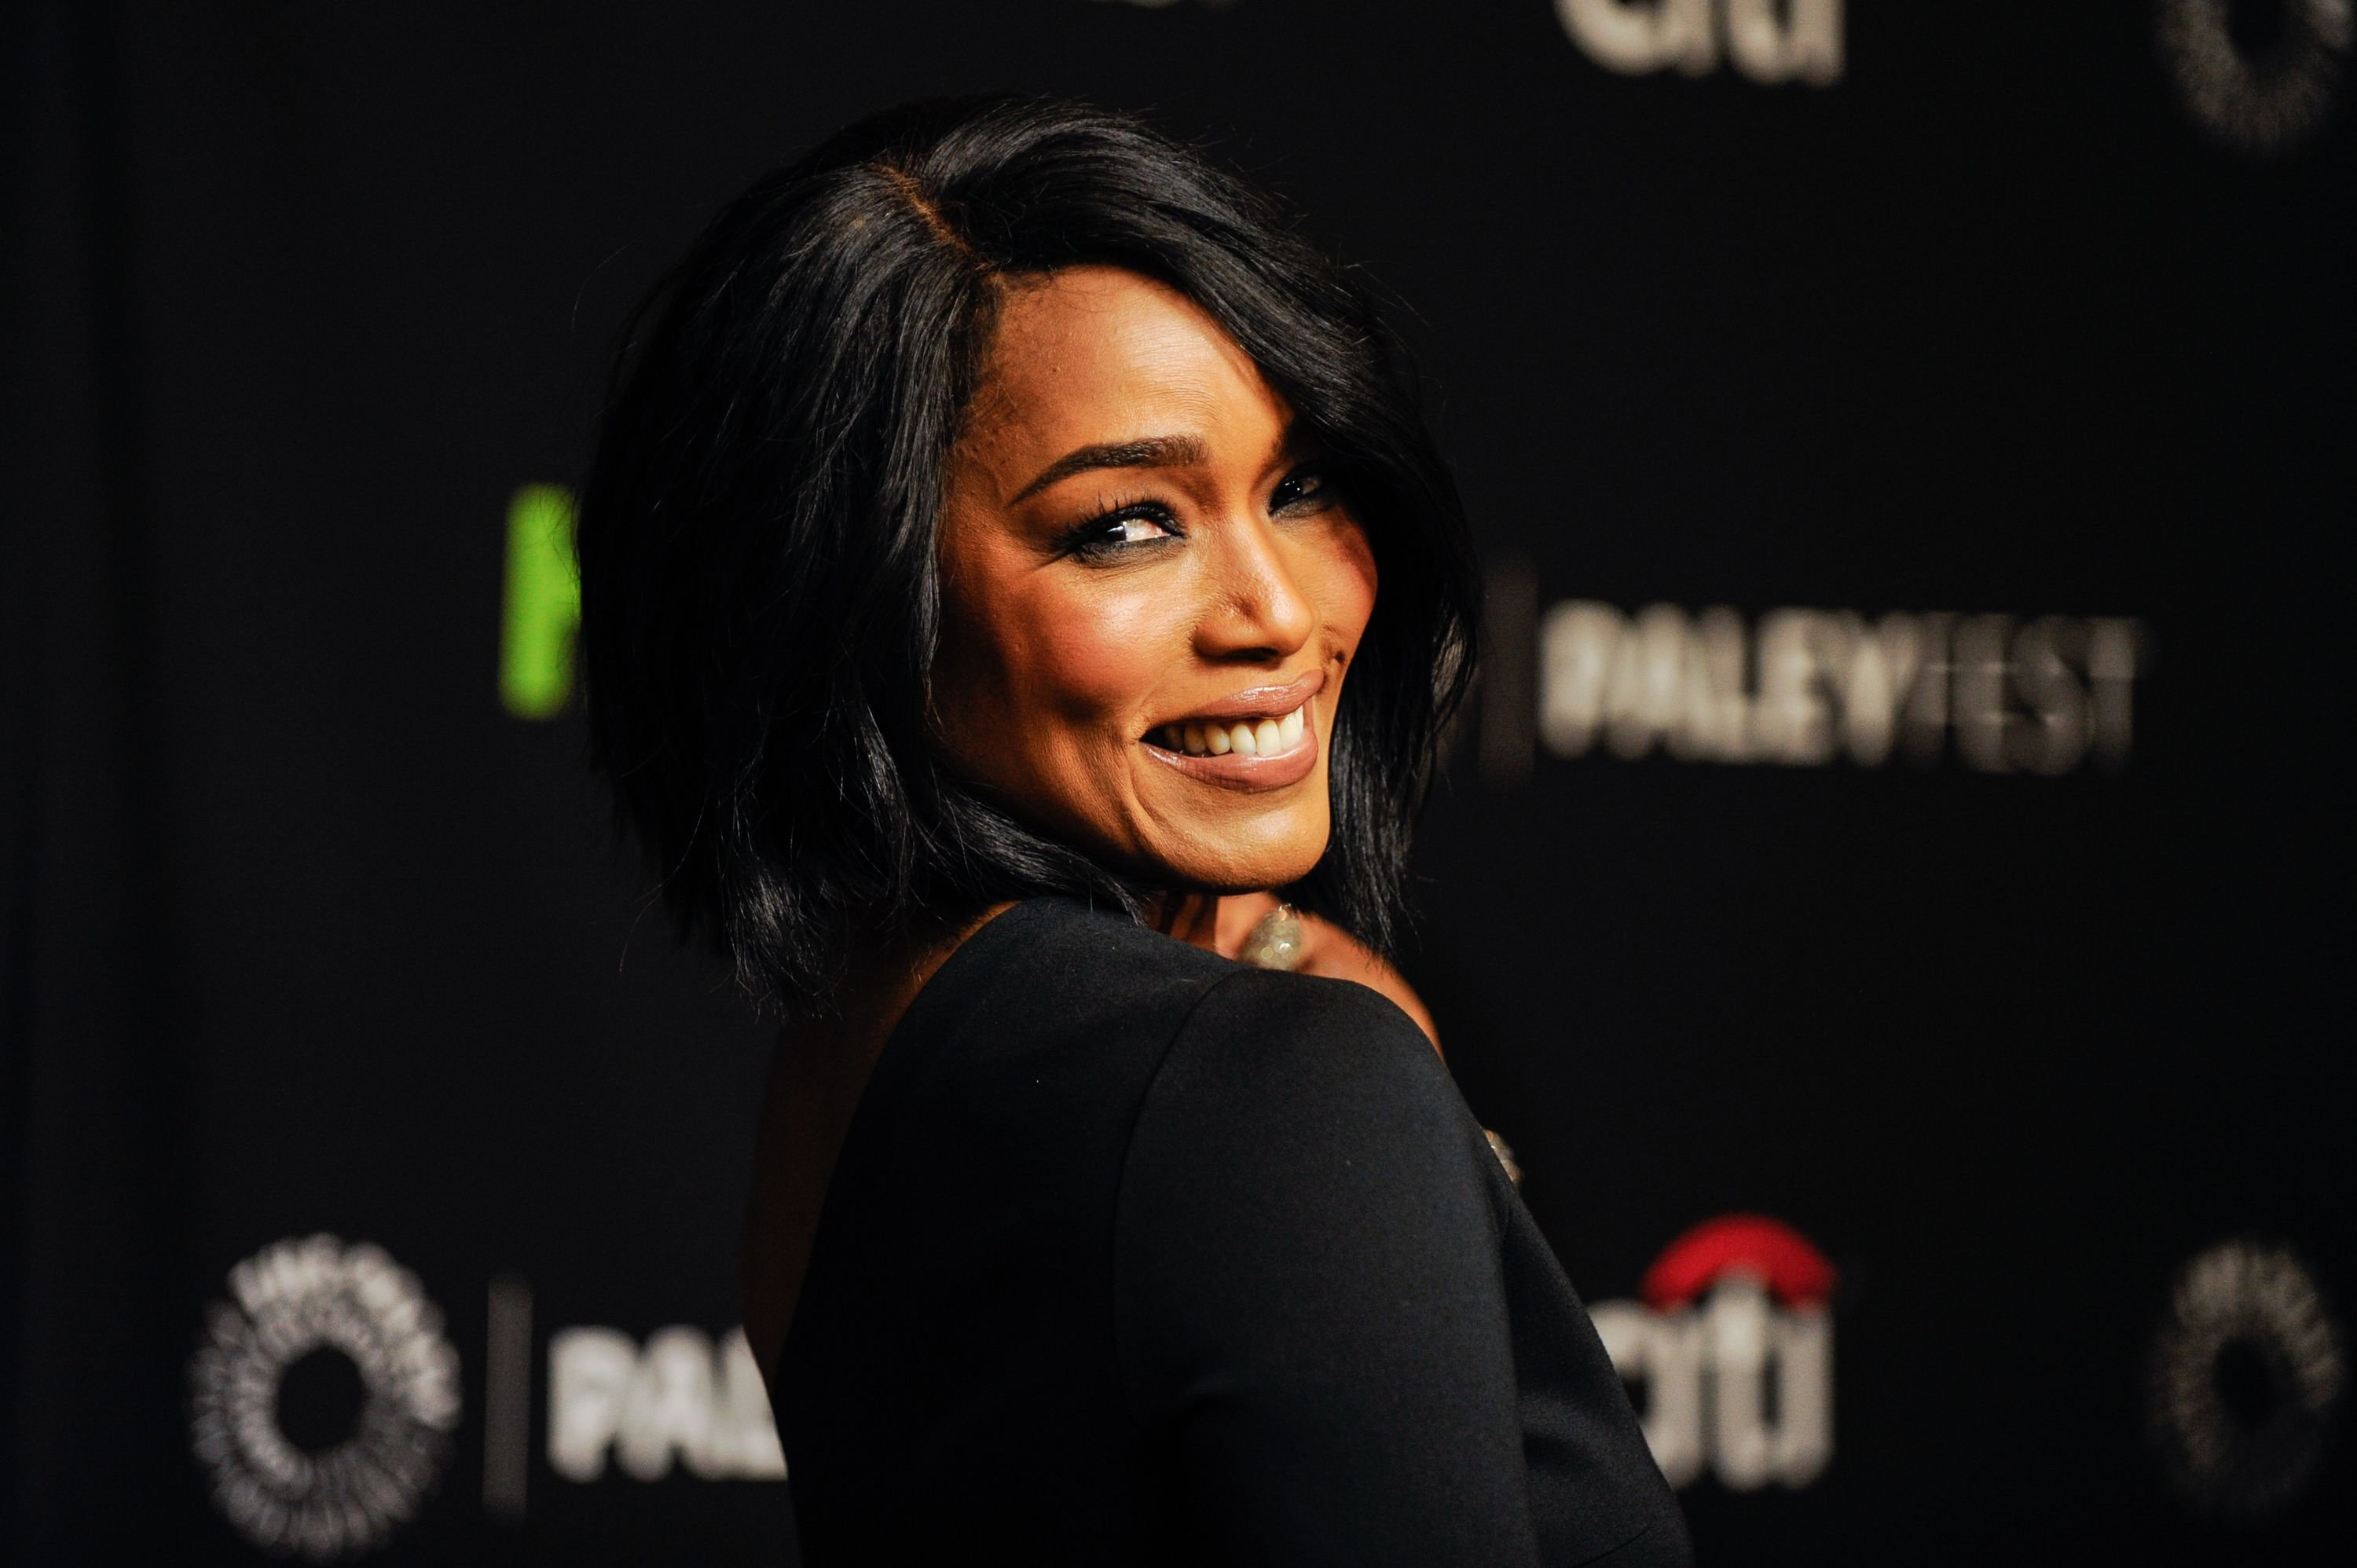 Angela Bassett in Hollywood attending the Paley Center For Media's 33rd Annual PaleyFest Los Angeles on the 20th of March 2016. |Photo: Getty Images